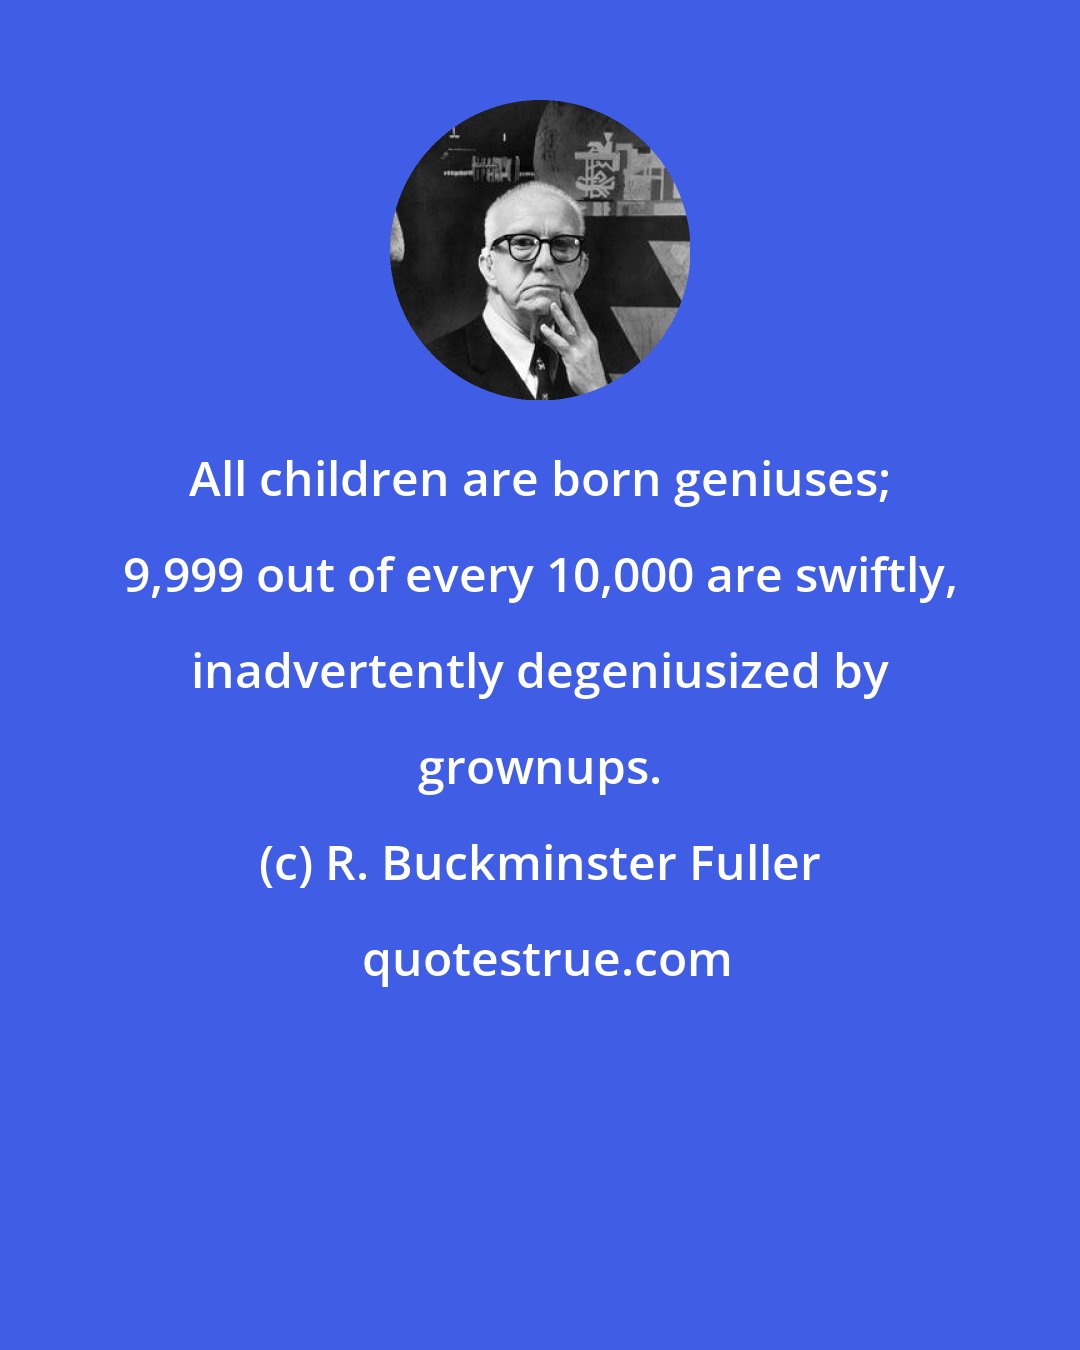 R. Buckminster Fuller: All children are born geniuses; 9,999 out of every 10,000 are swiftly, inadvertently degeniusized by grownups.